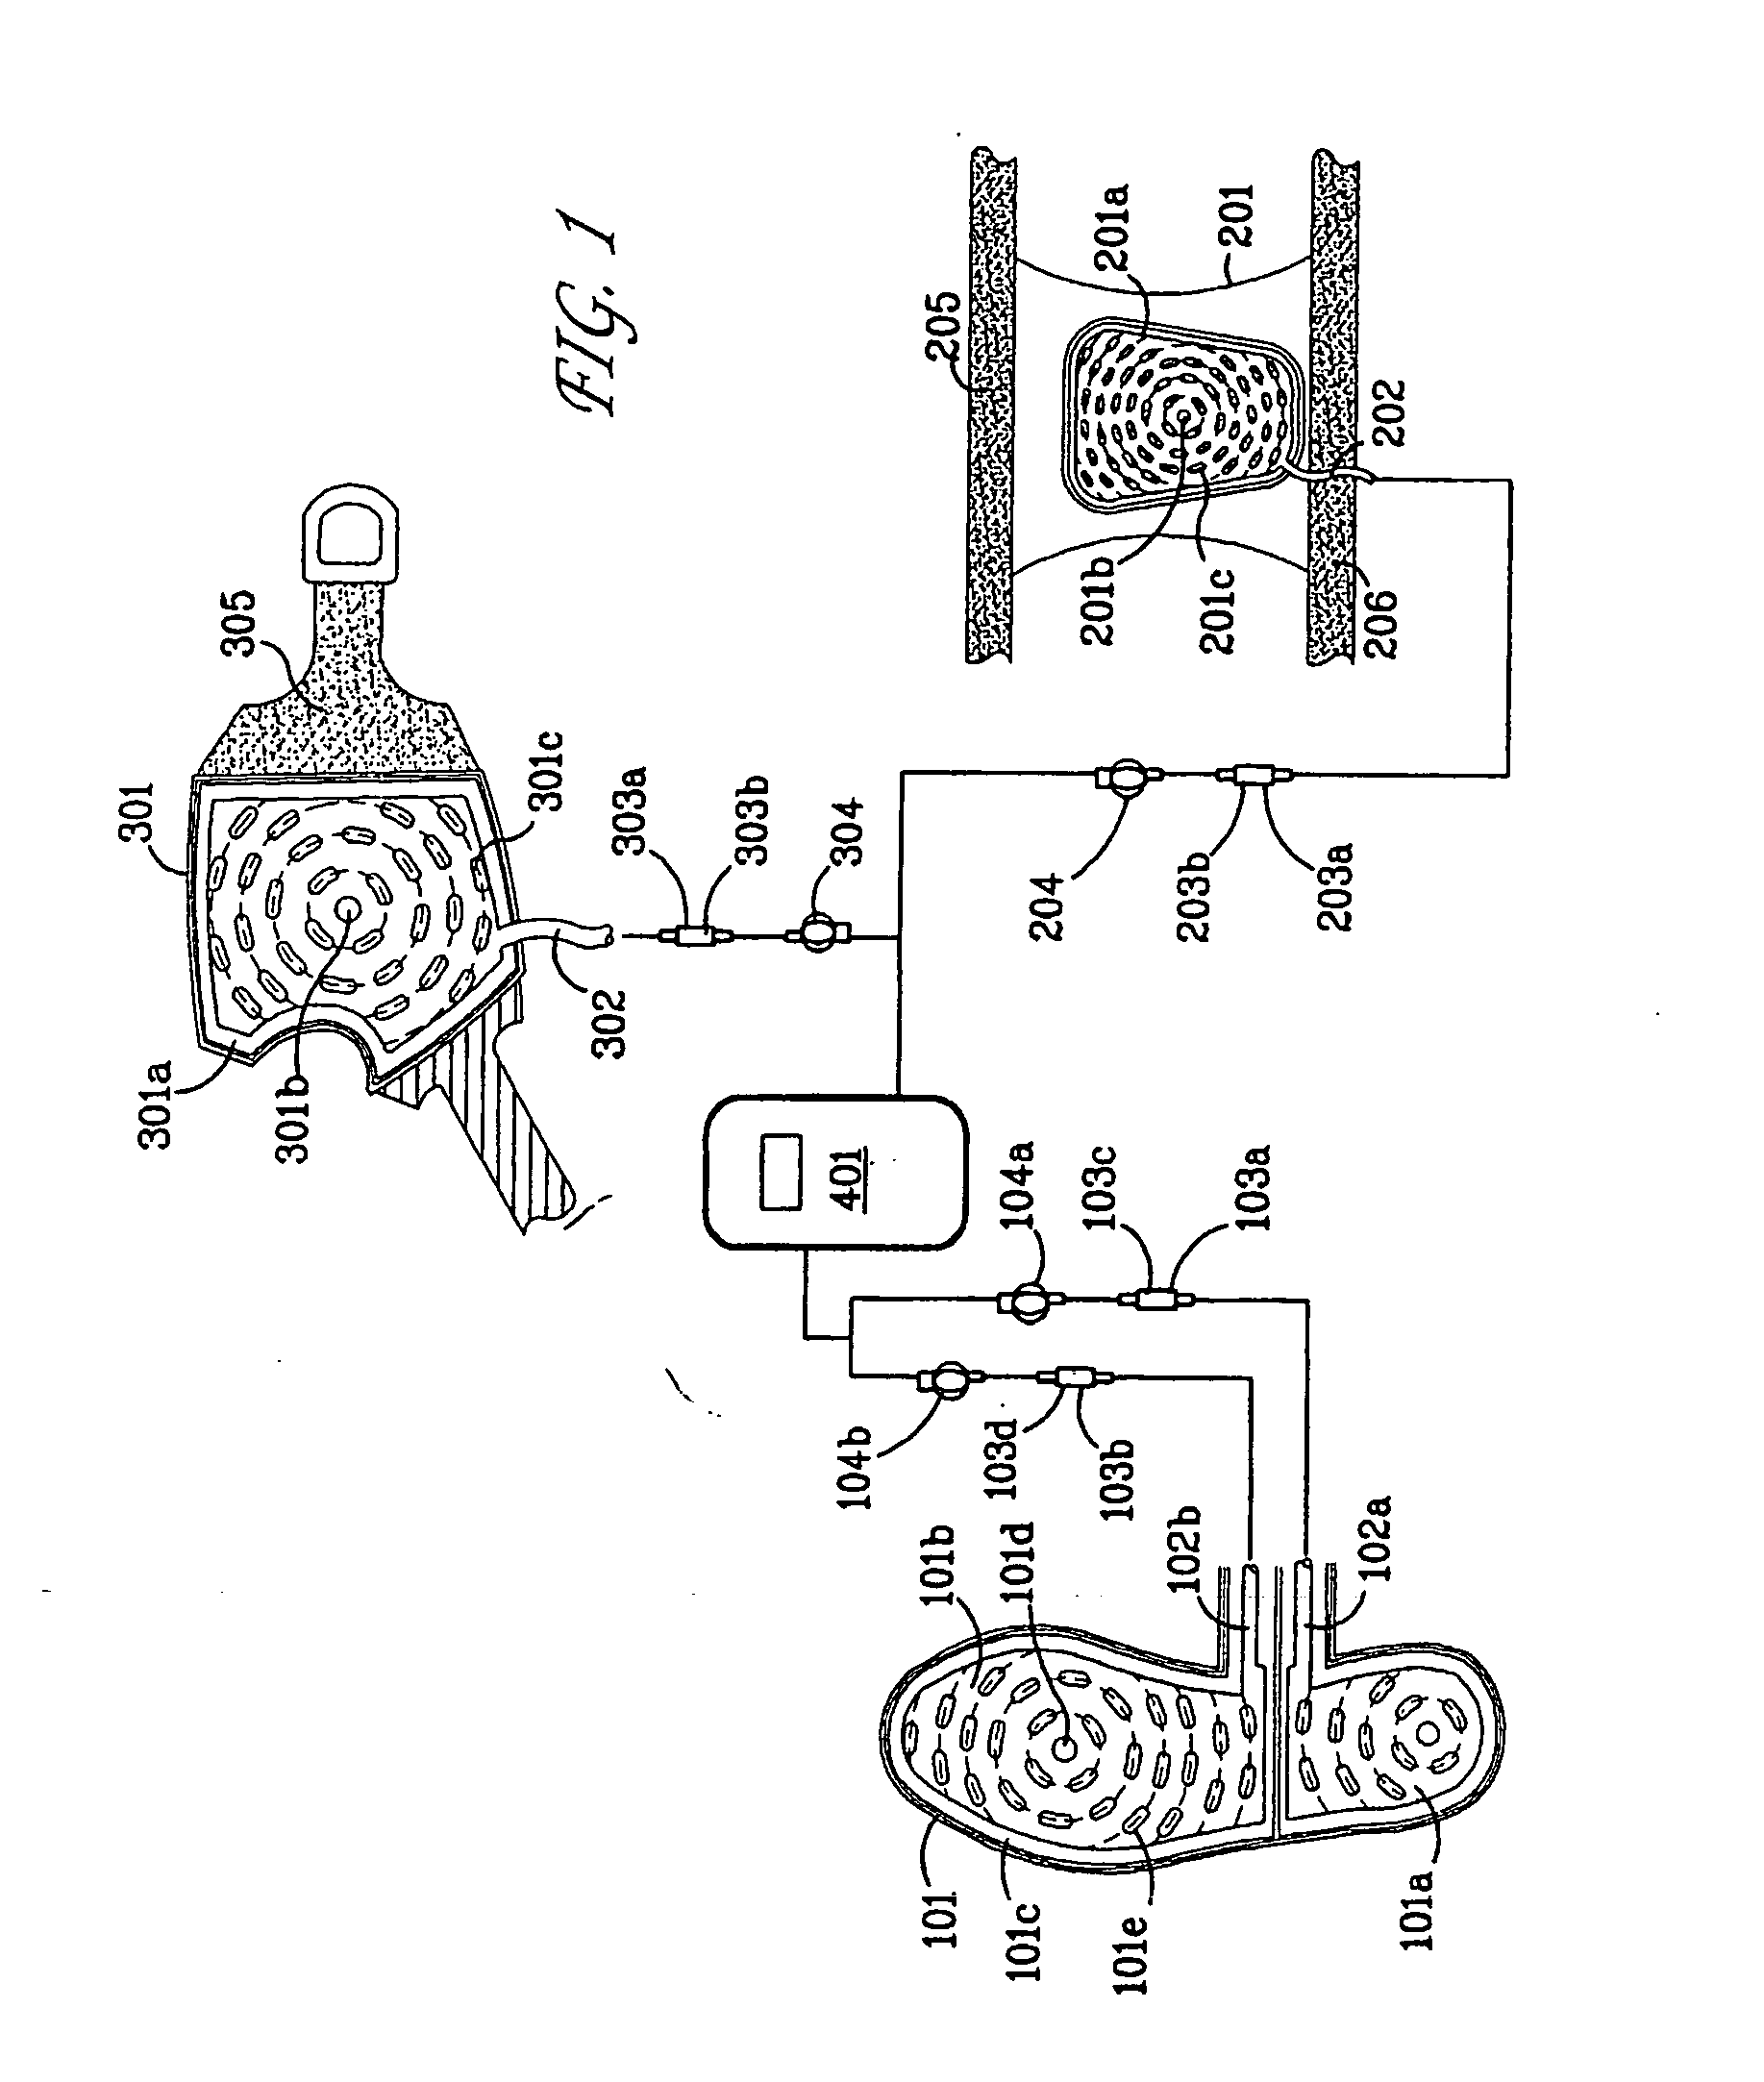 Force sensor system for use in monitoring weight bearing